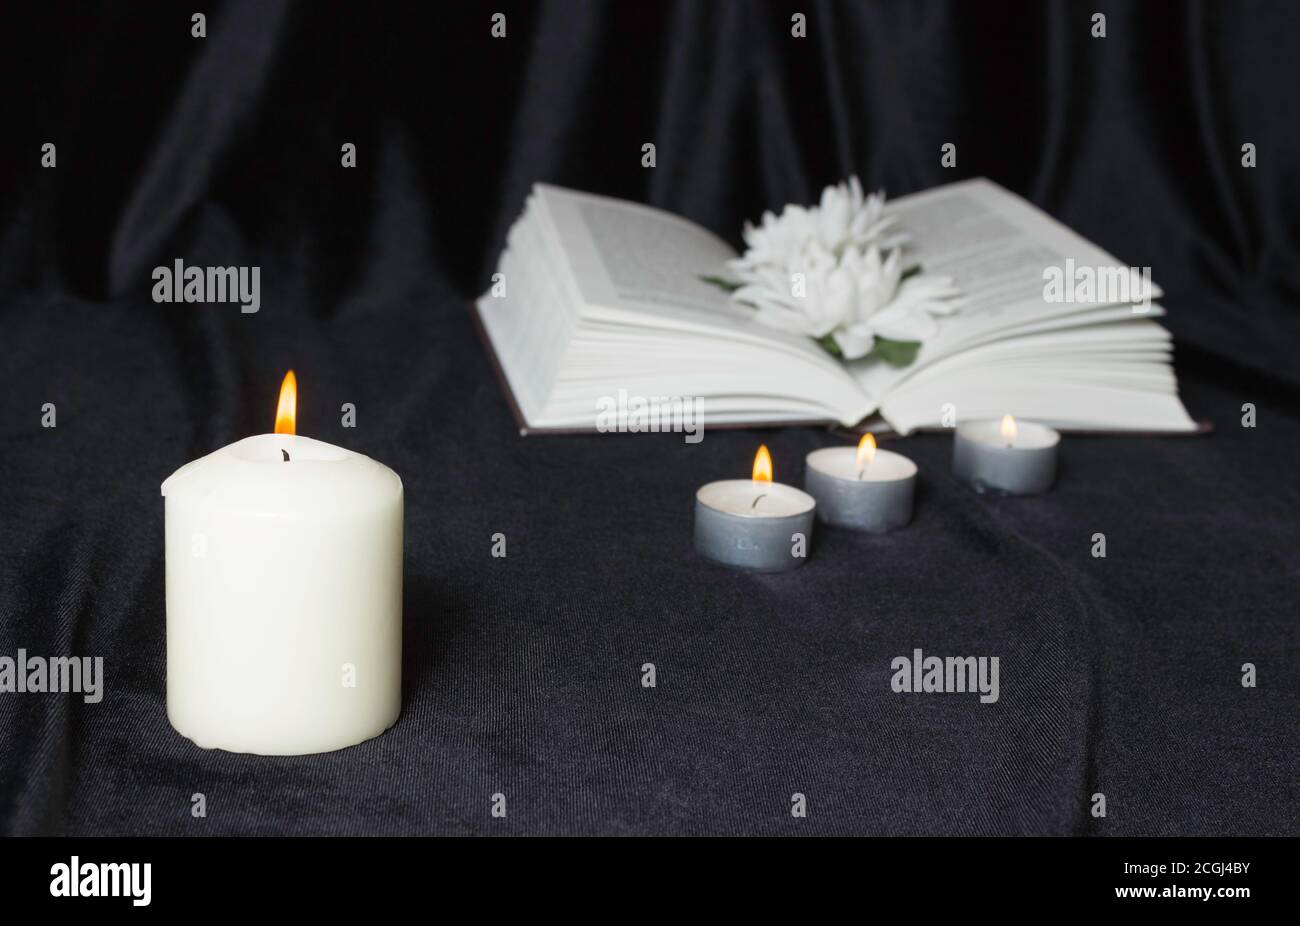 Condolence card. A white memorial candle with white flowers and an open book. The funeral, the sadness. Stock Photo